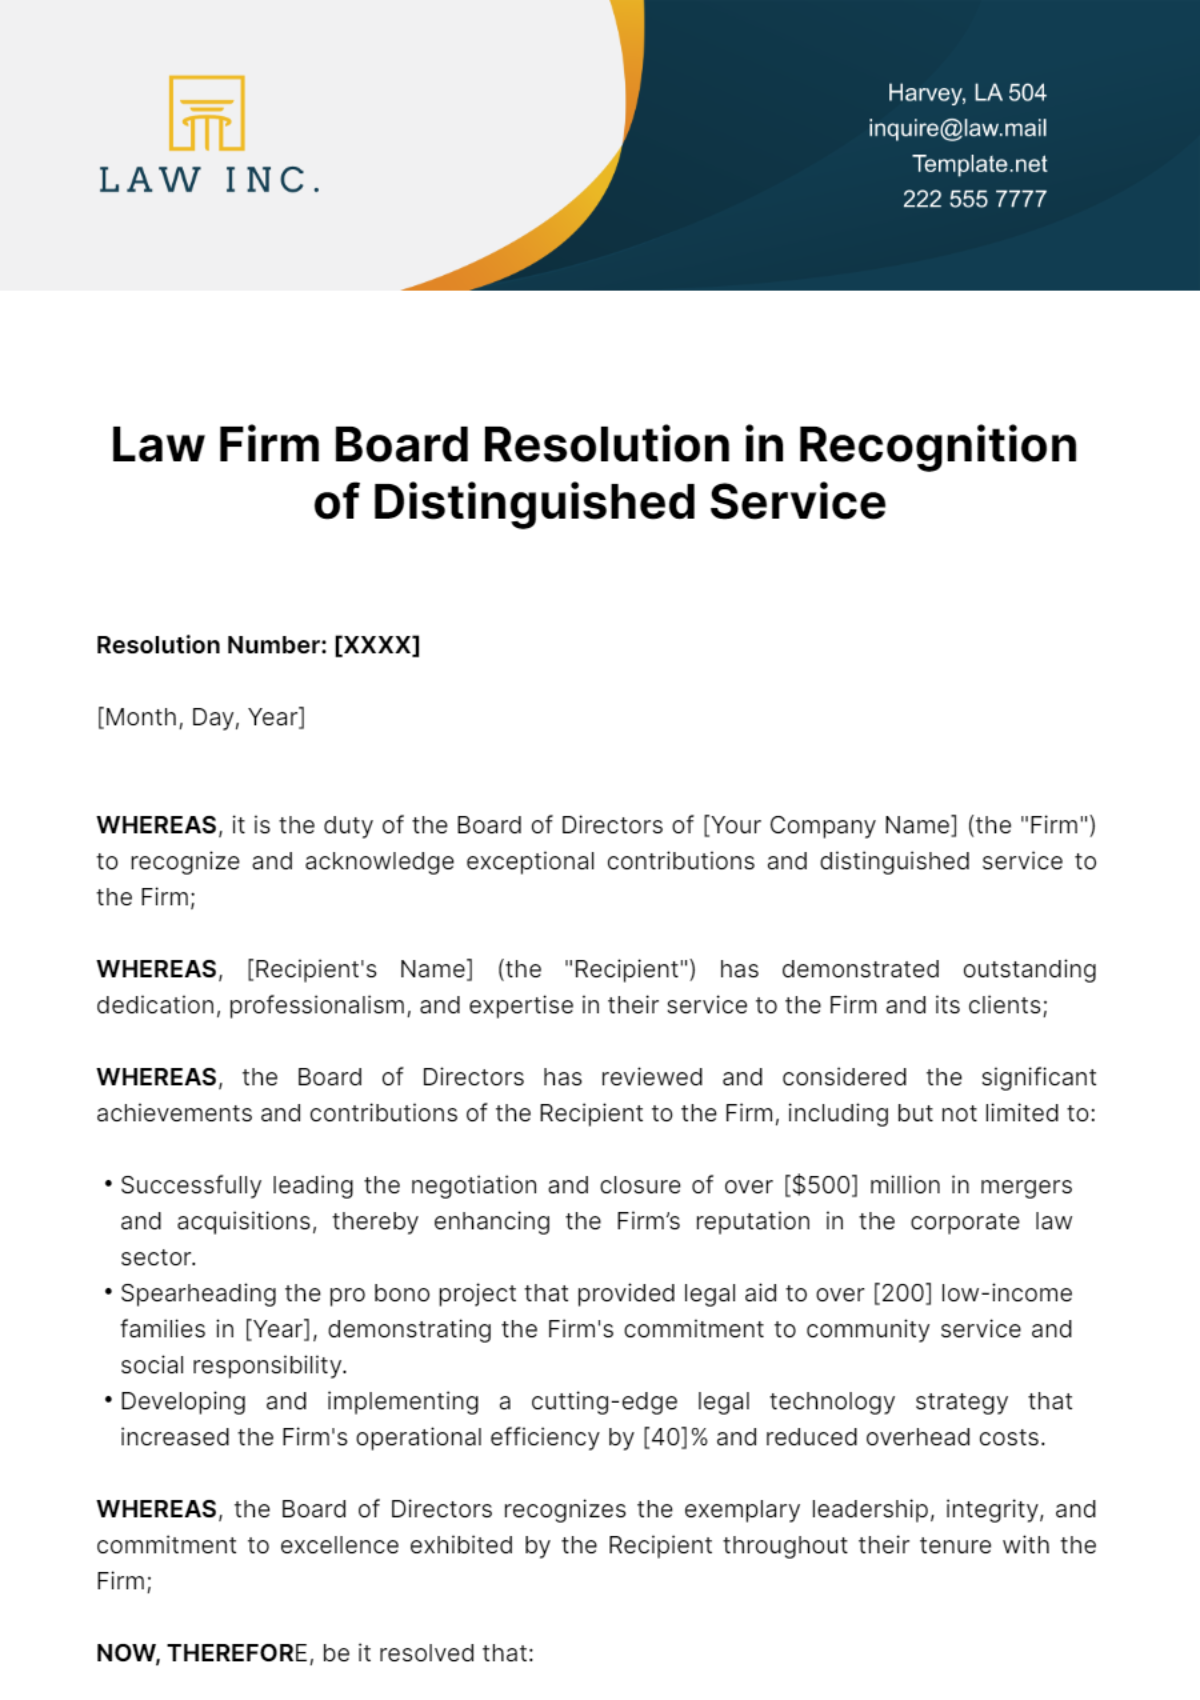 Free Law Firm Board Resolution in Recognition of Distinguished Service Template